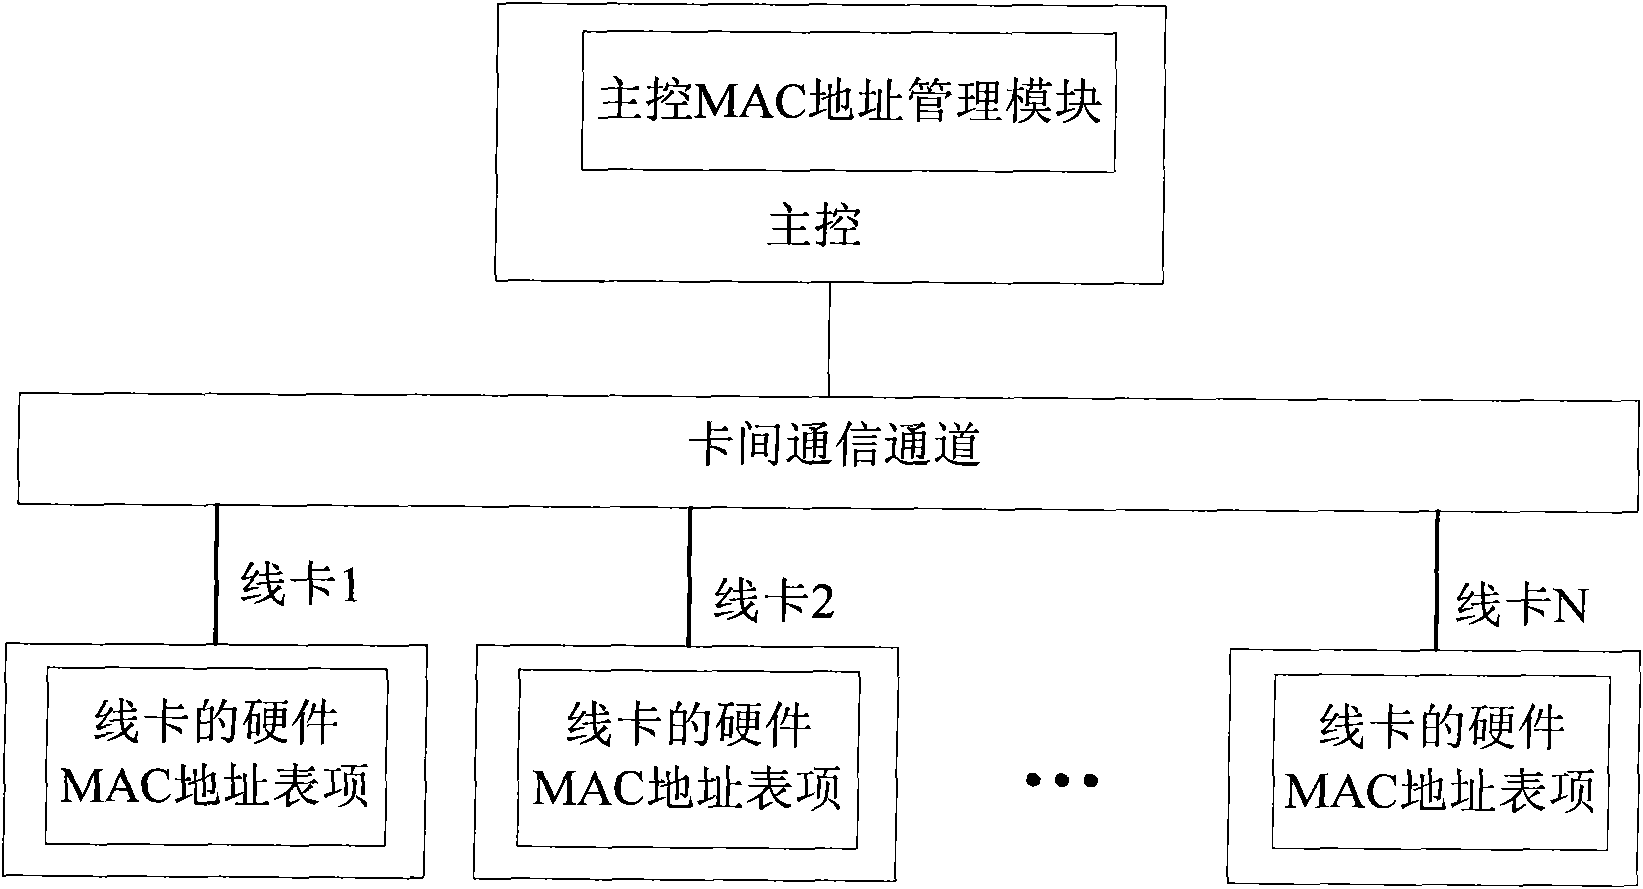 Conditional synchronization method for MAC address table entry of distributed switch